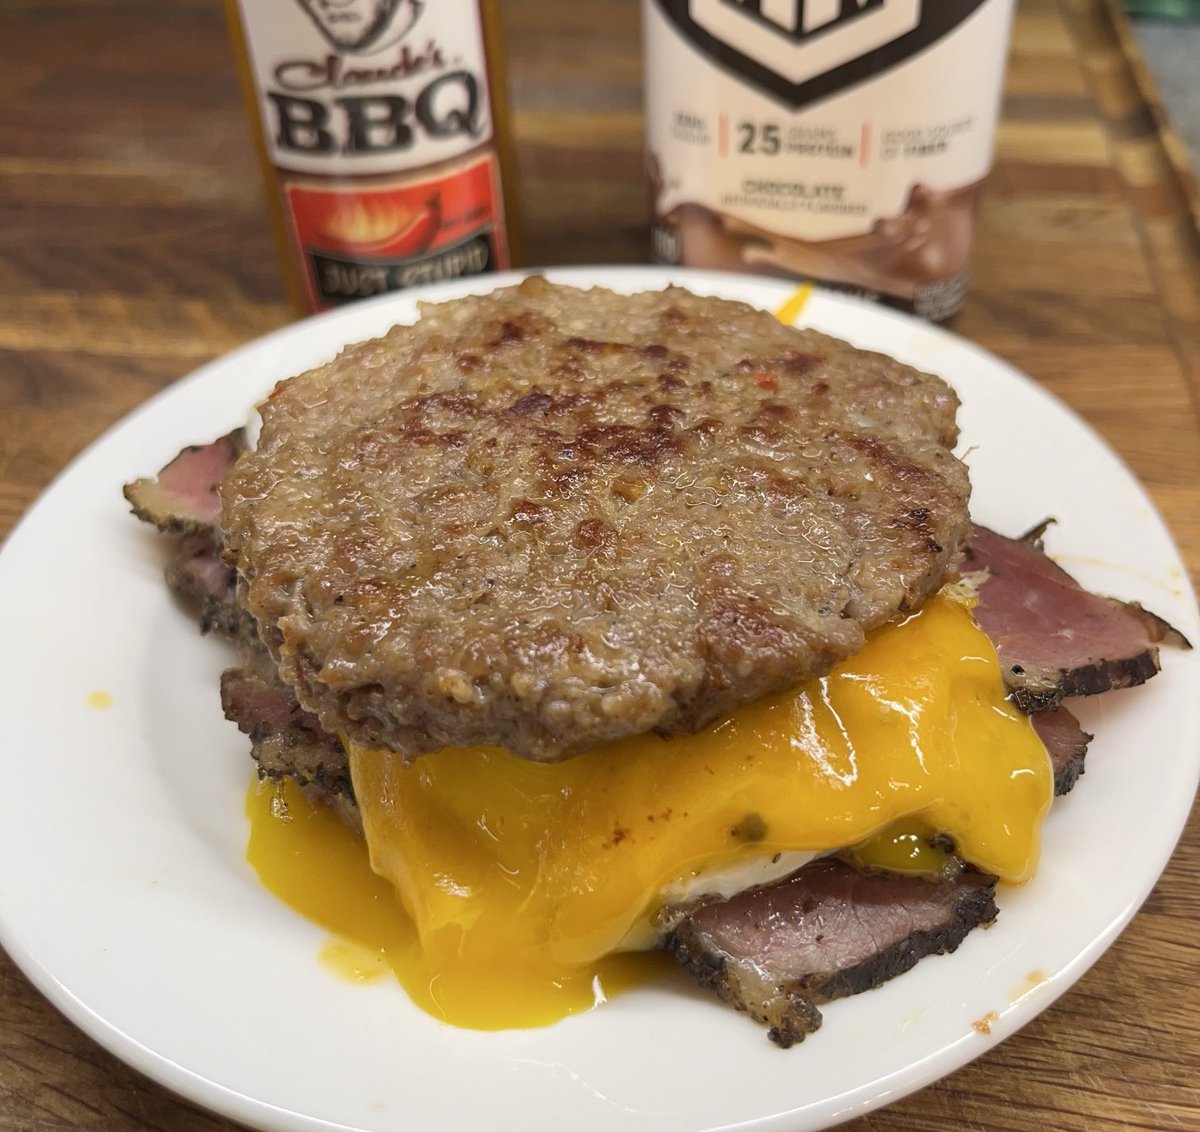 Leg day refuel- sausage patty, pastrami, egg, extra sharp cheddar cheese, and sausage patty.